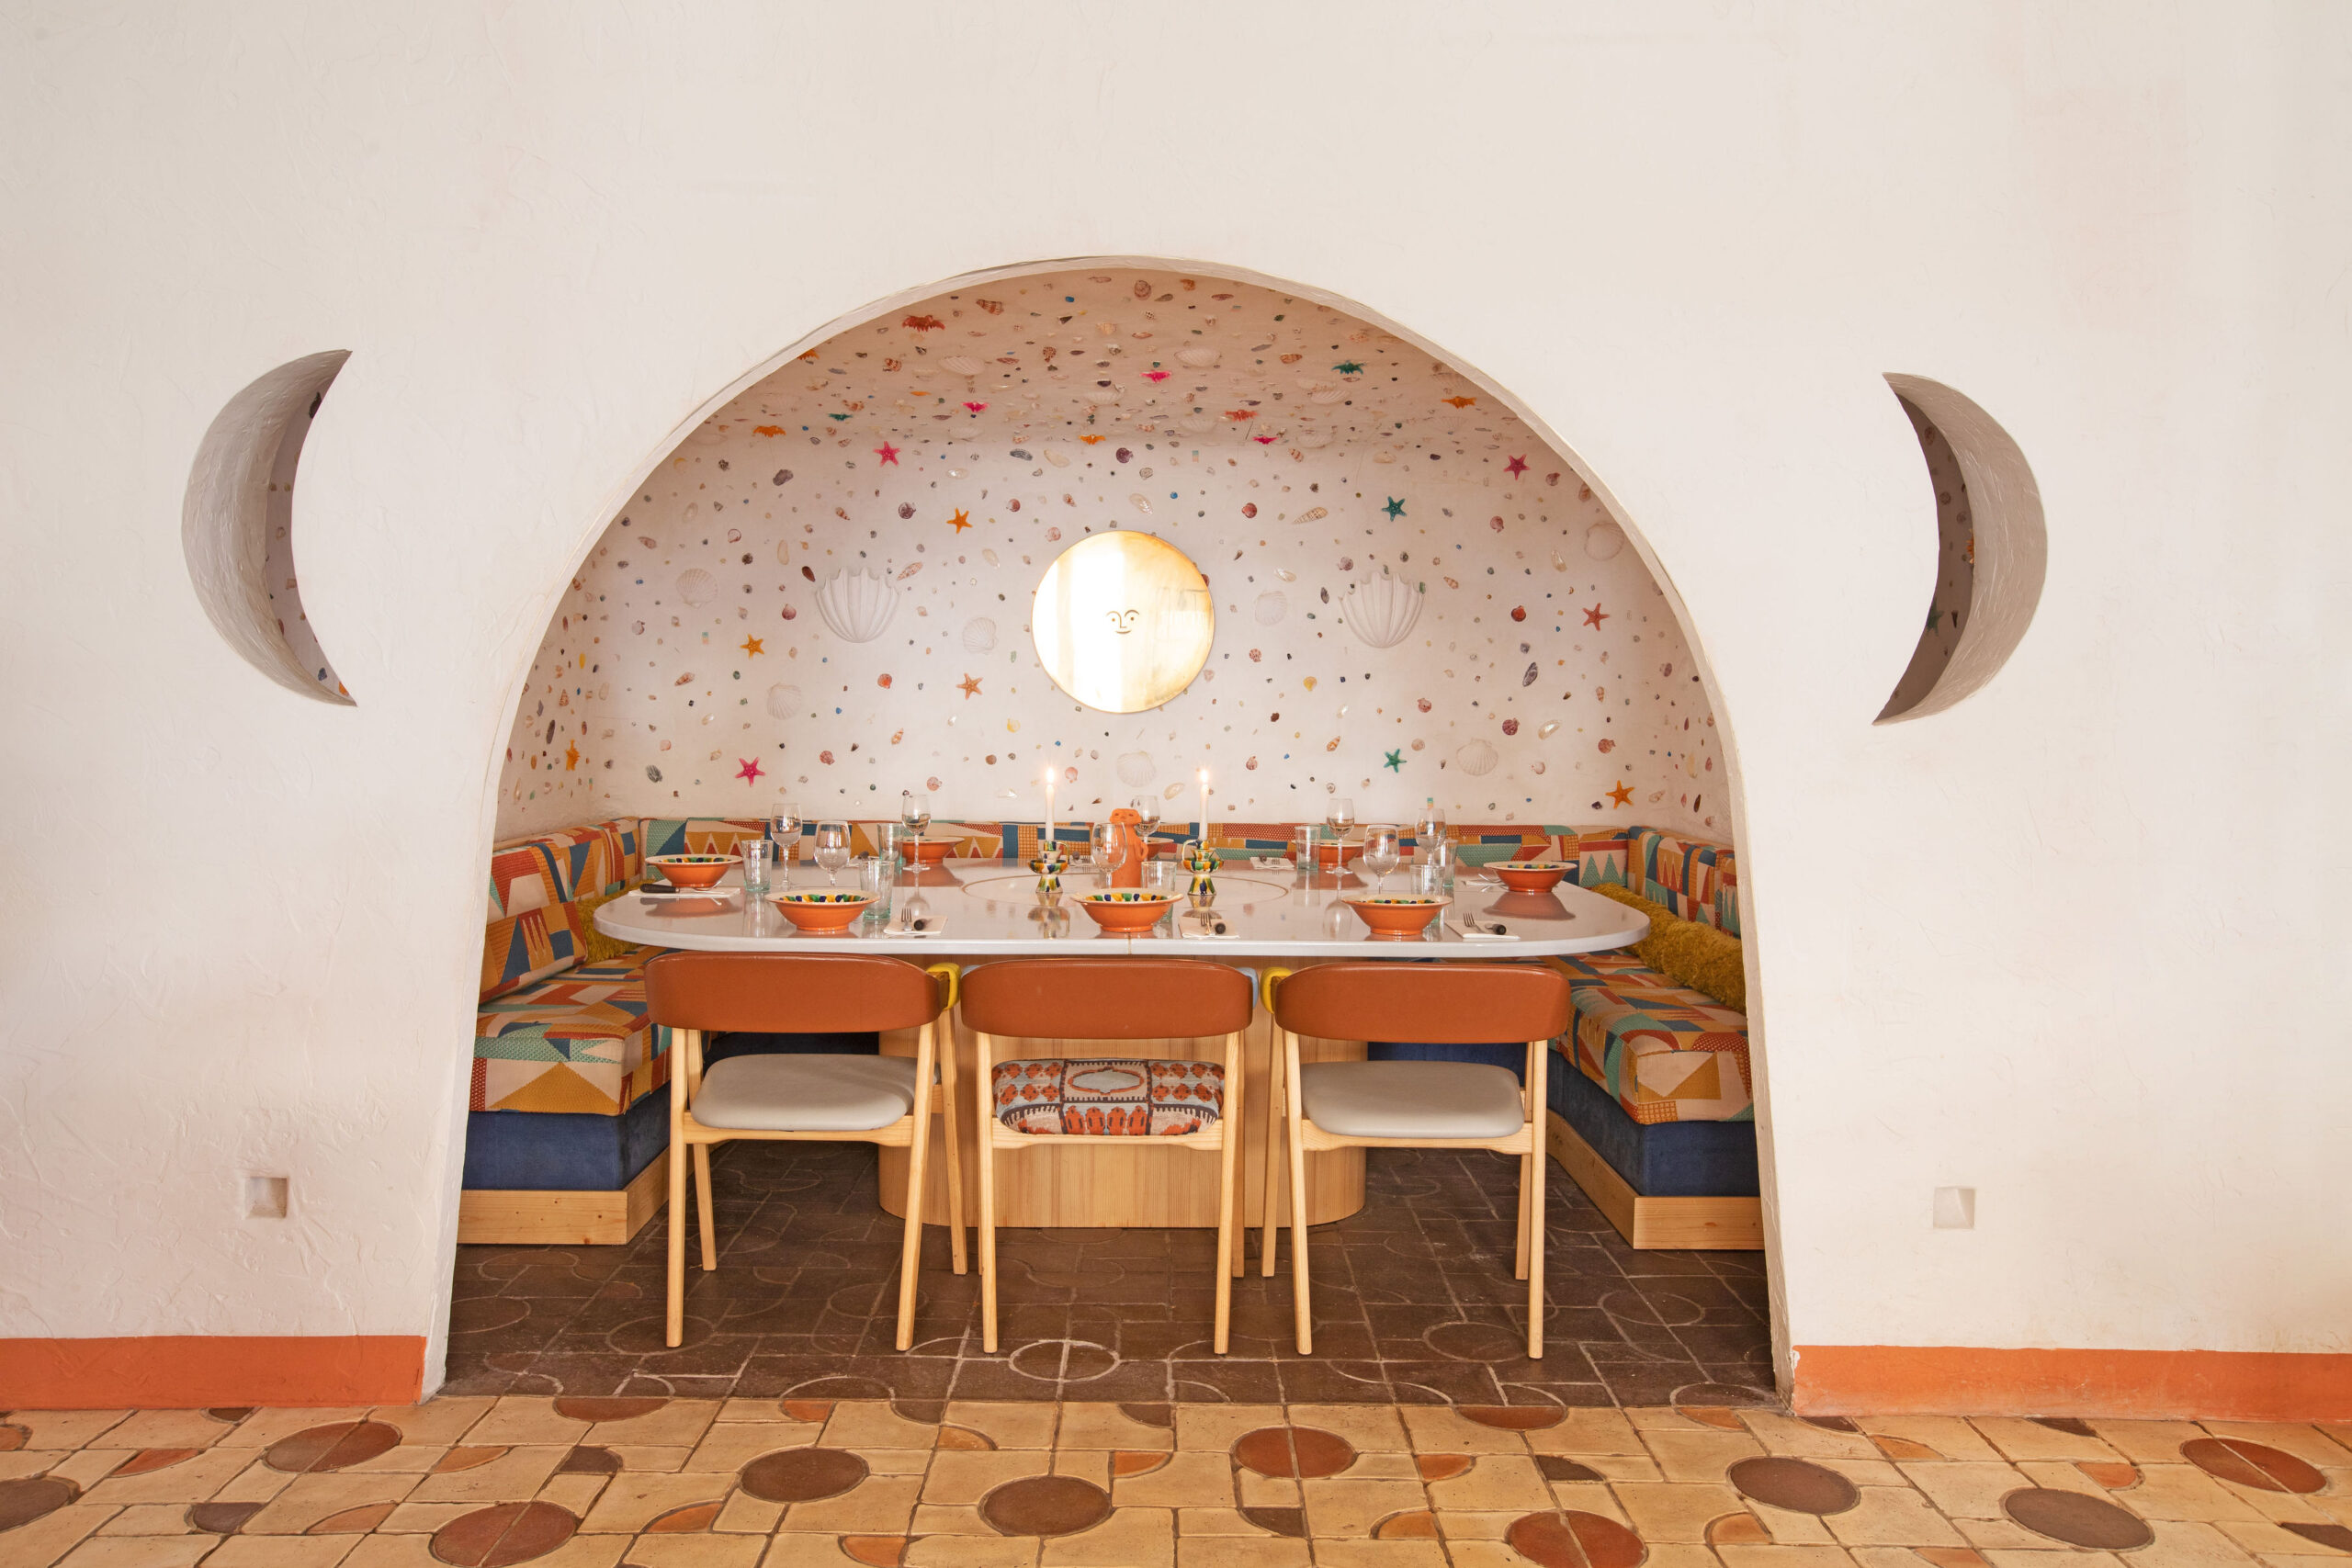 A portal to a restaurant booth, decked in stars, shells, and warm tones